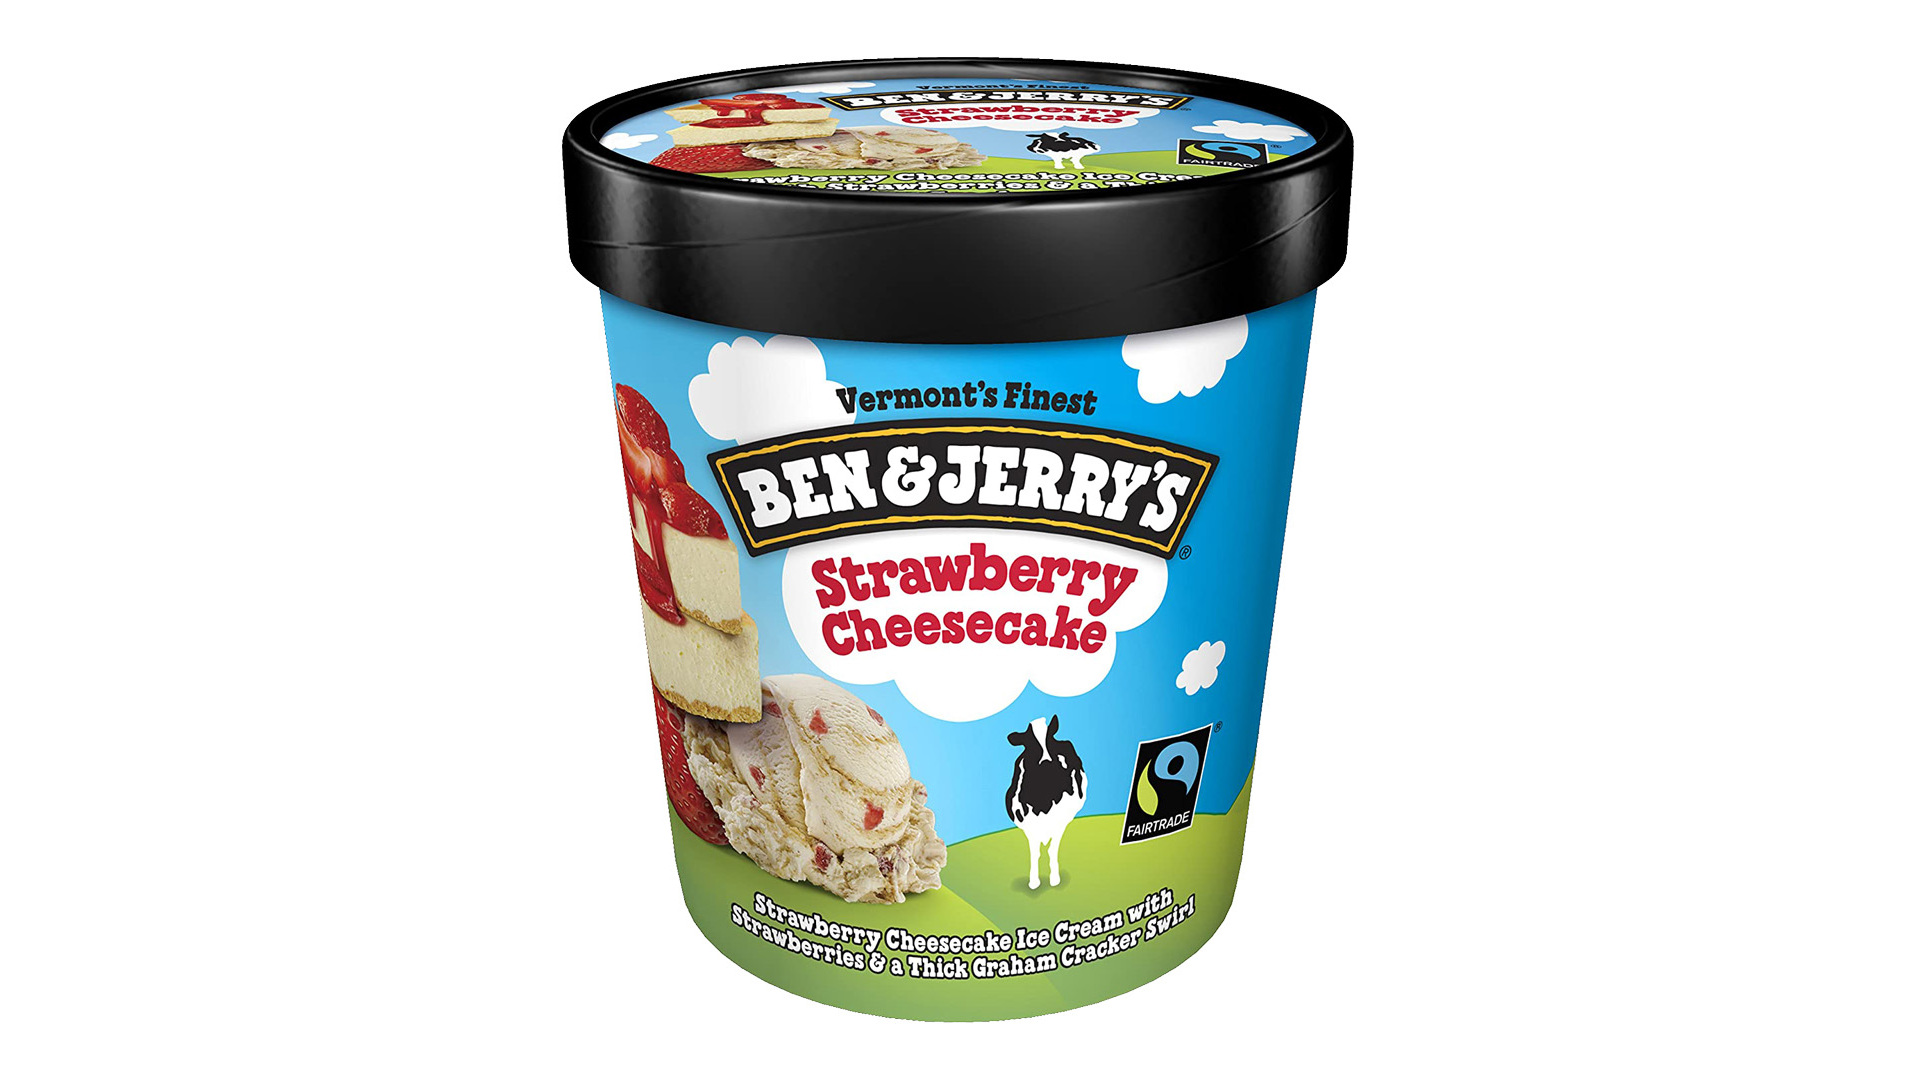 Ben & Jerry's Strawberry Cheesecake 500ml - Number One Collection in Wanstead Flats E7